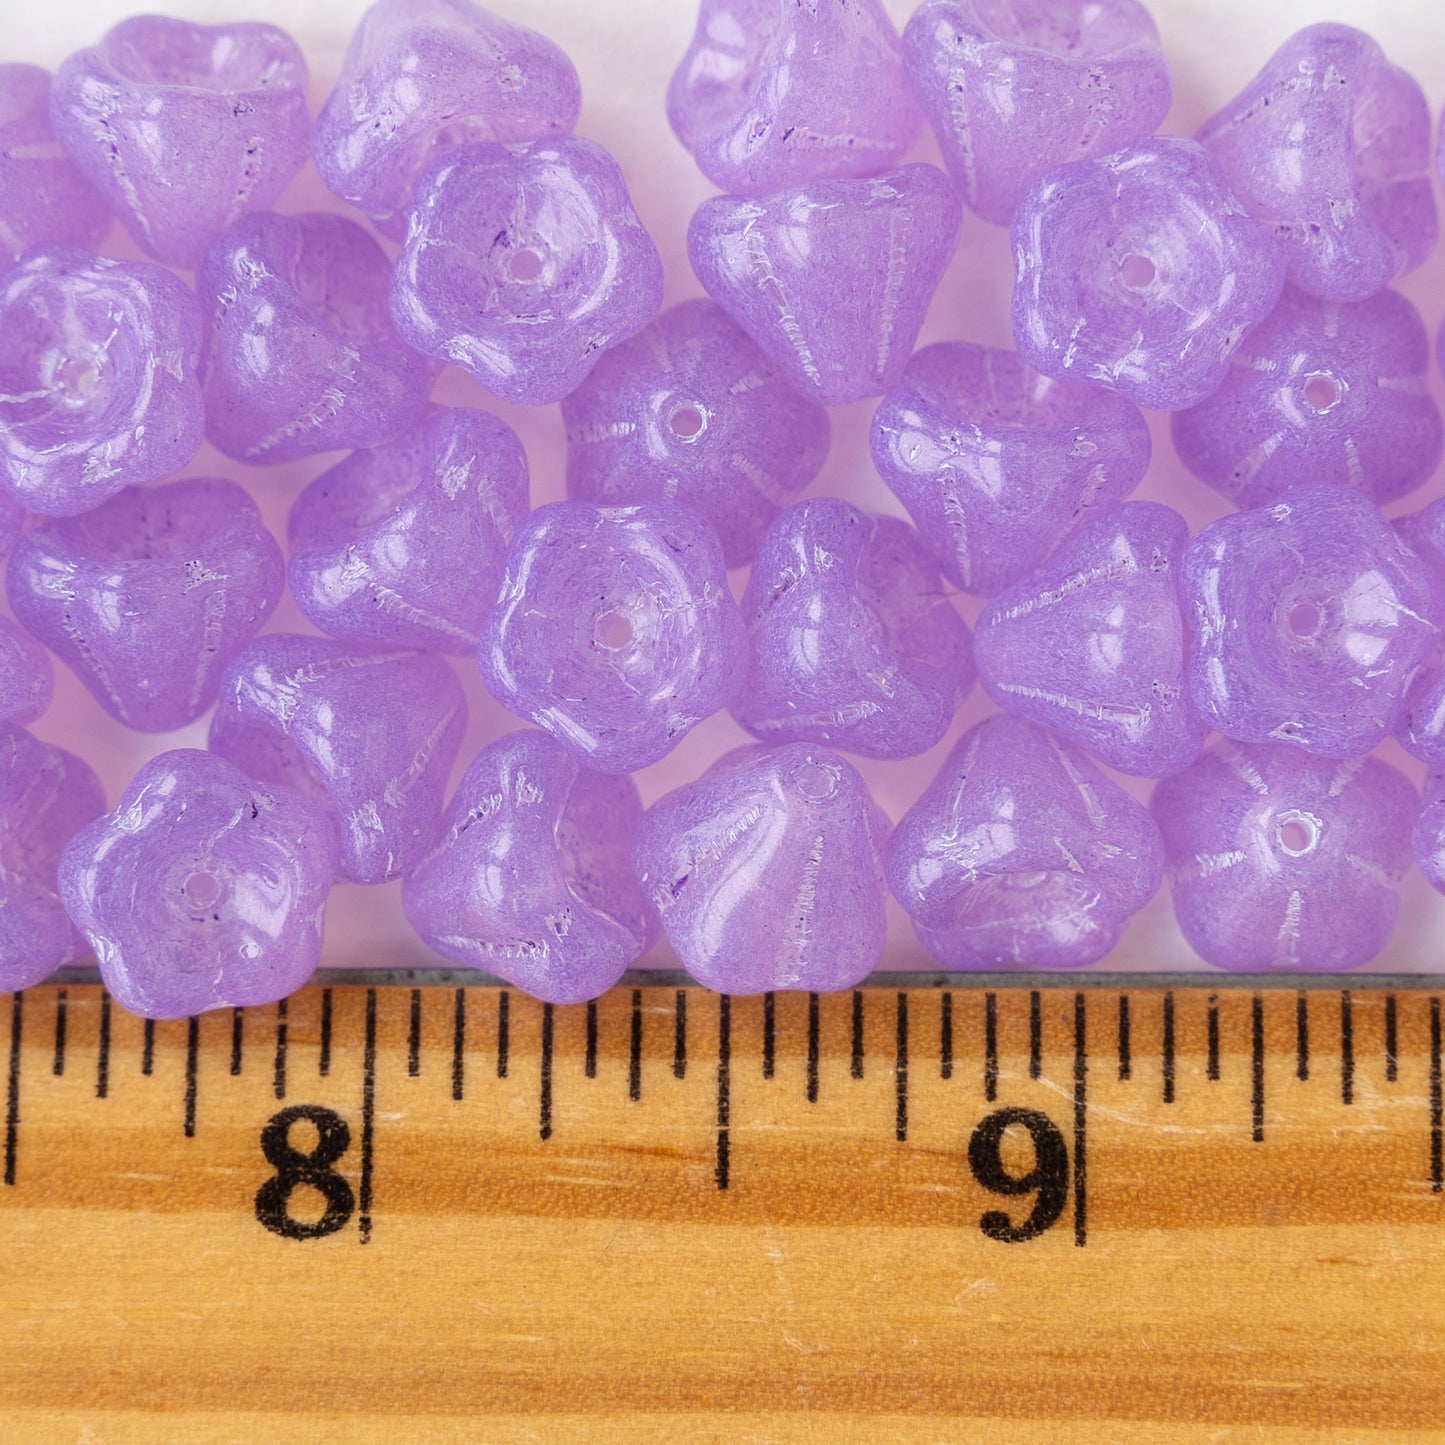 Load image into Gallery viewer, 10mm Bell Flower Beads - Lavender Opaline - 20 Beads
